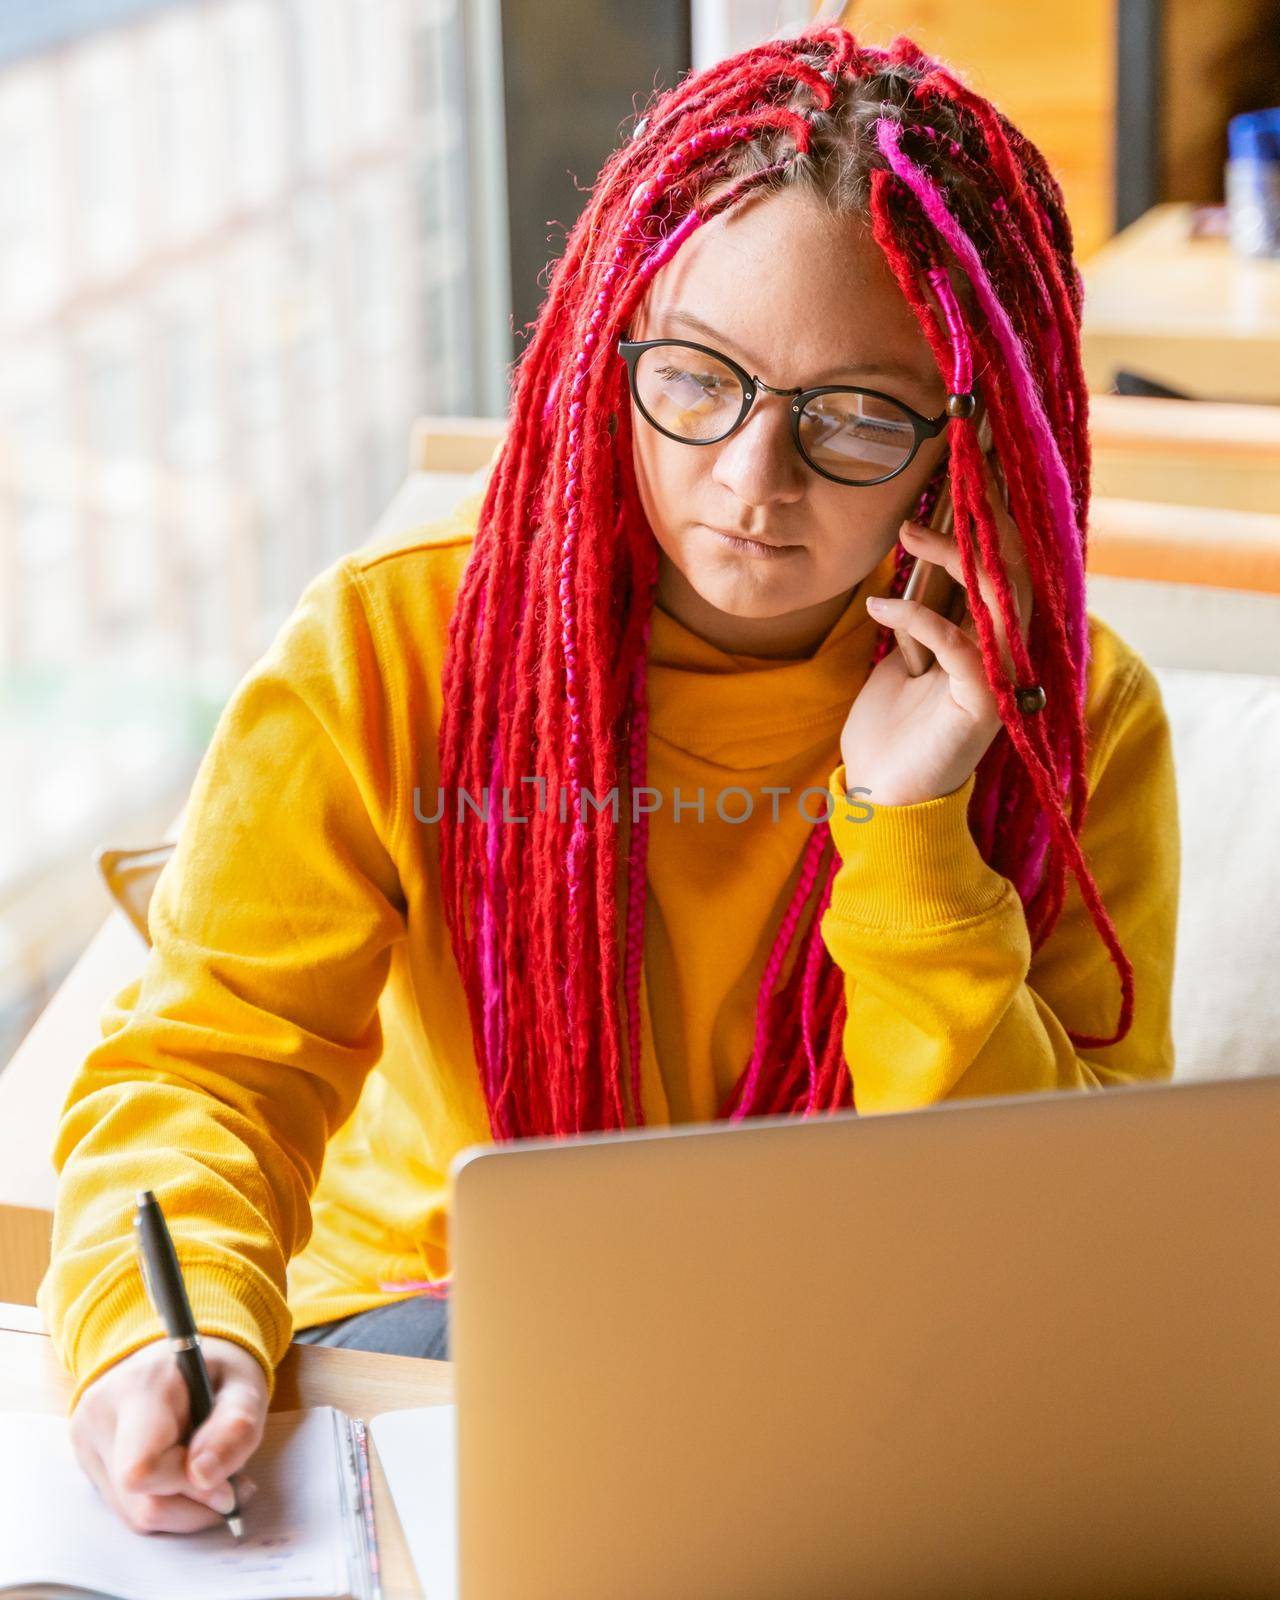 Concept of digital nomad. Girl freelancer talking on mobile phone, working remotely on laptop in cafe, coworking. Woman with long pink dreadlocks in informal setting, in a casual clothes, vertical